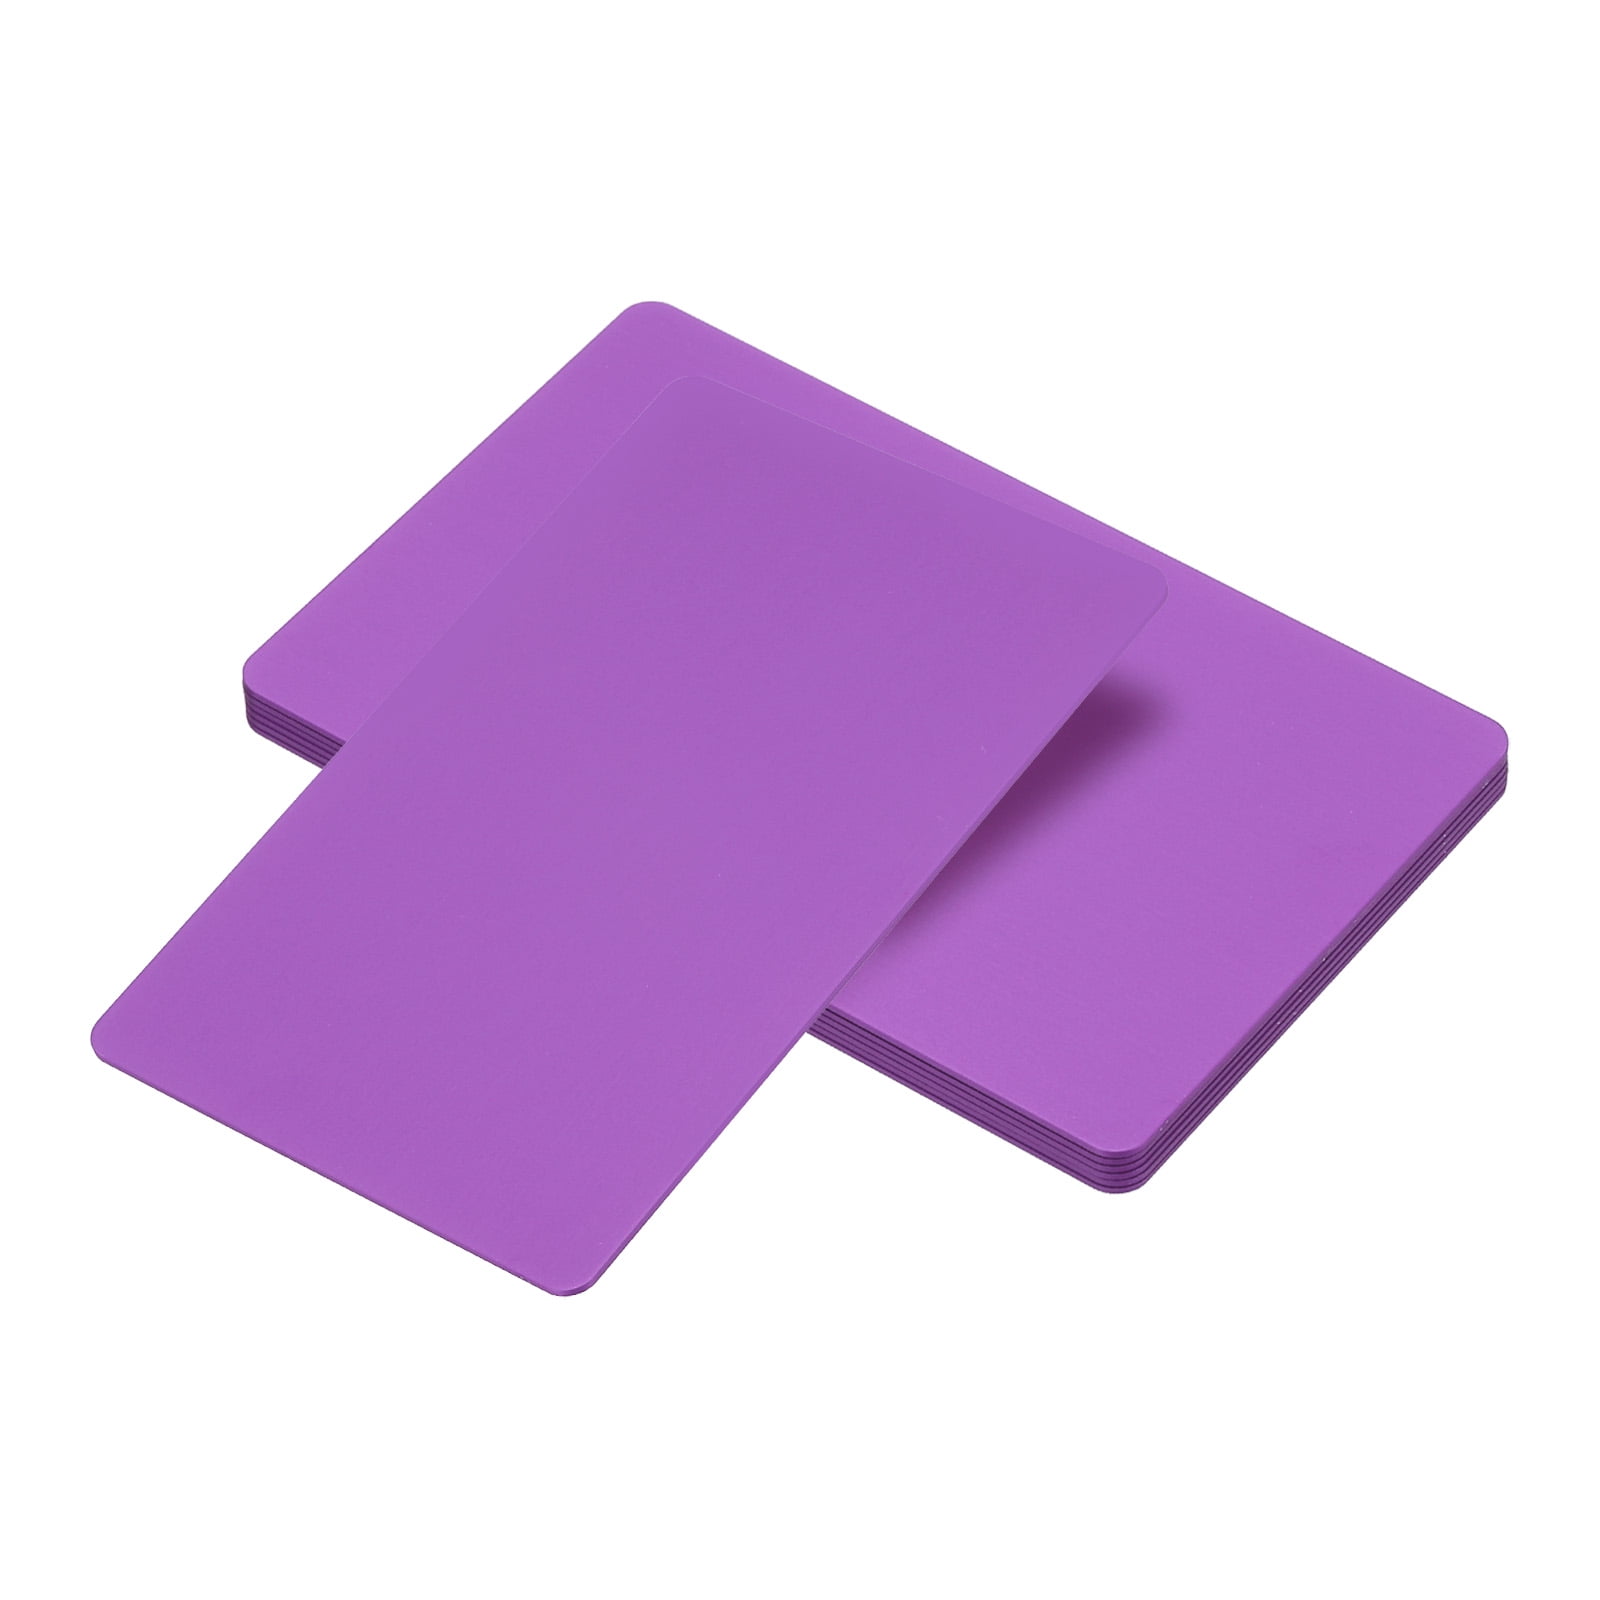 Anodized Aluminum Business Card Size - Blank